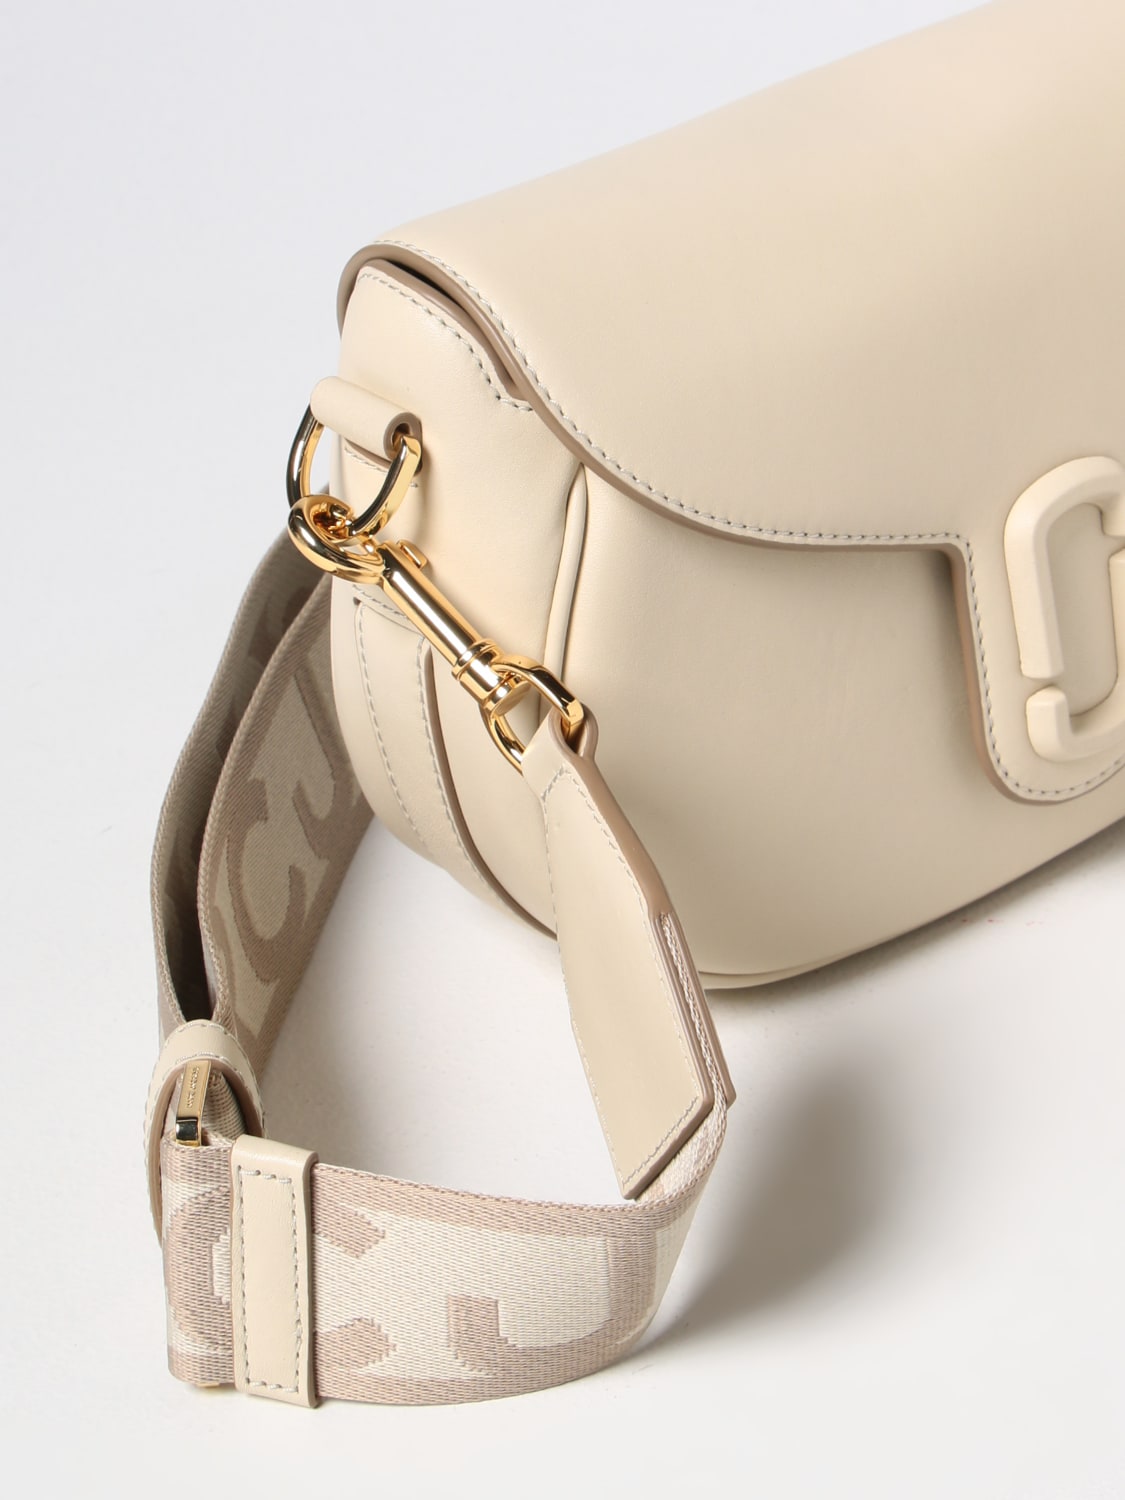 Marc Jacobs Bags in White